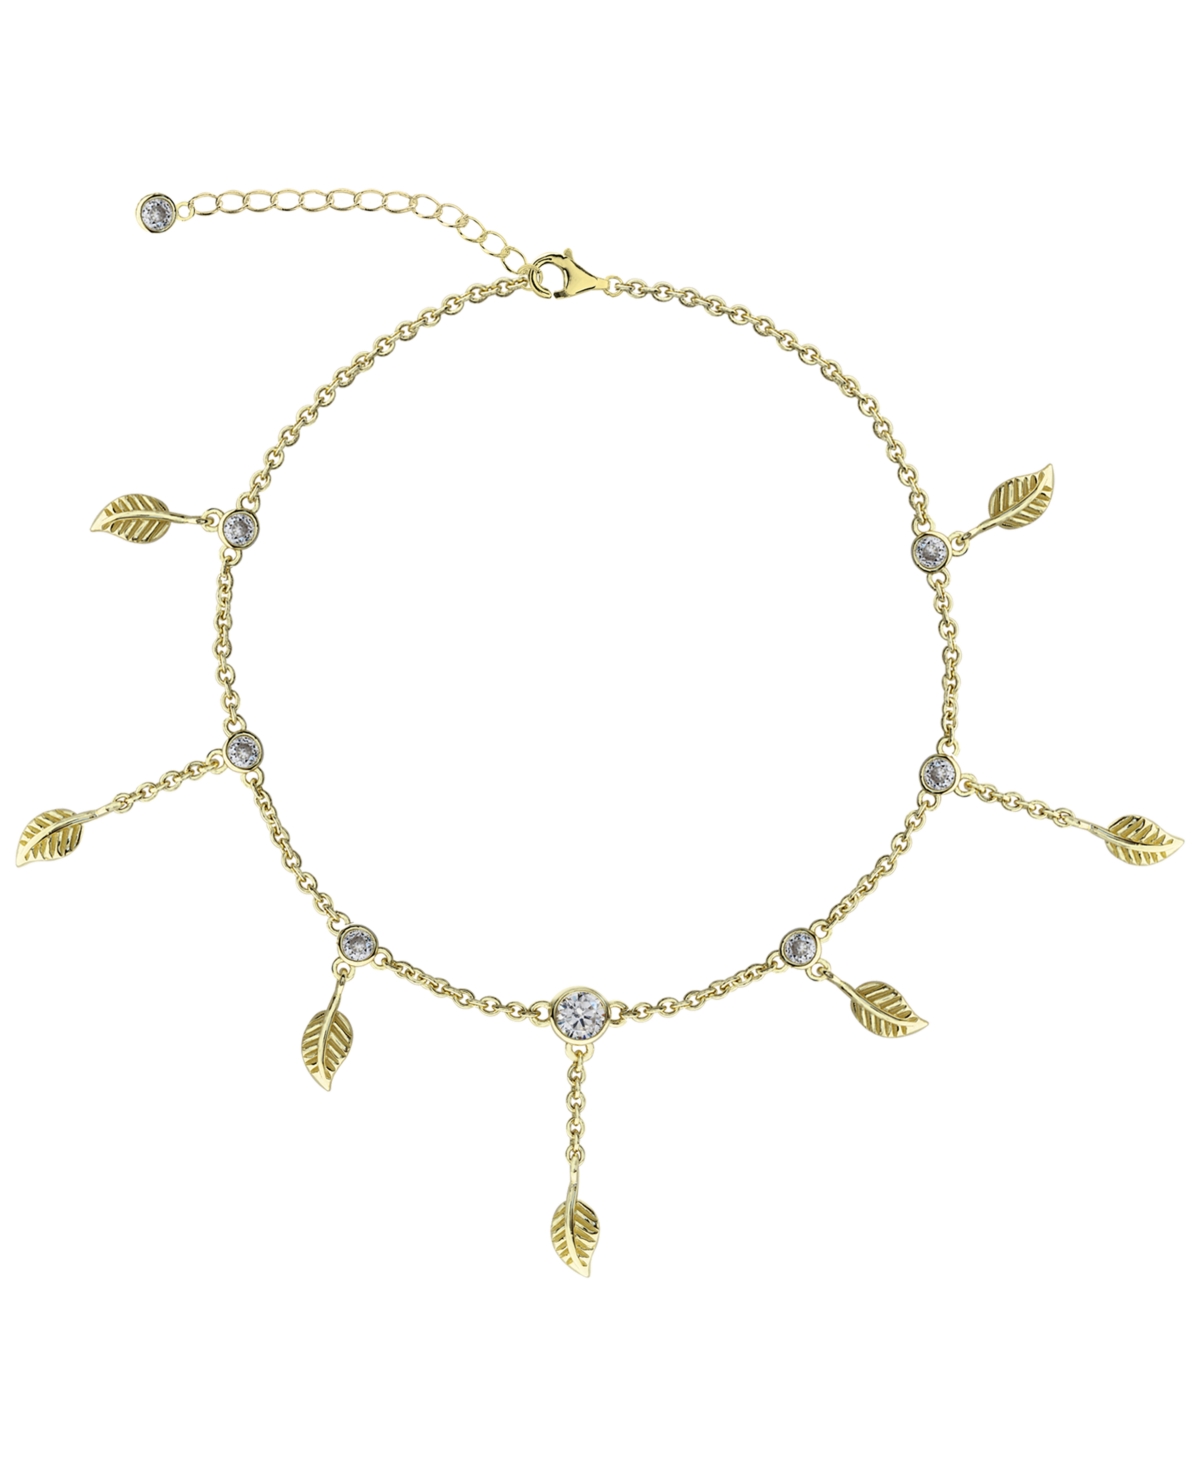 Bodifine Cubic Zirconia Leaves 10K Gold-Tone Sterling Silver-Tone Anklet - Gold